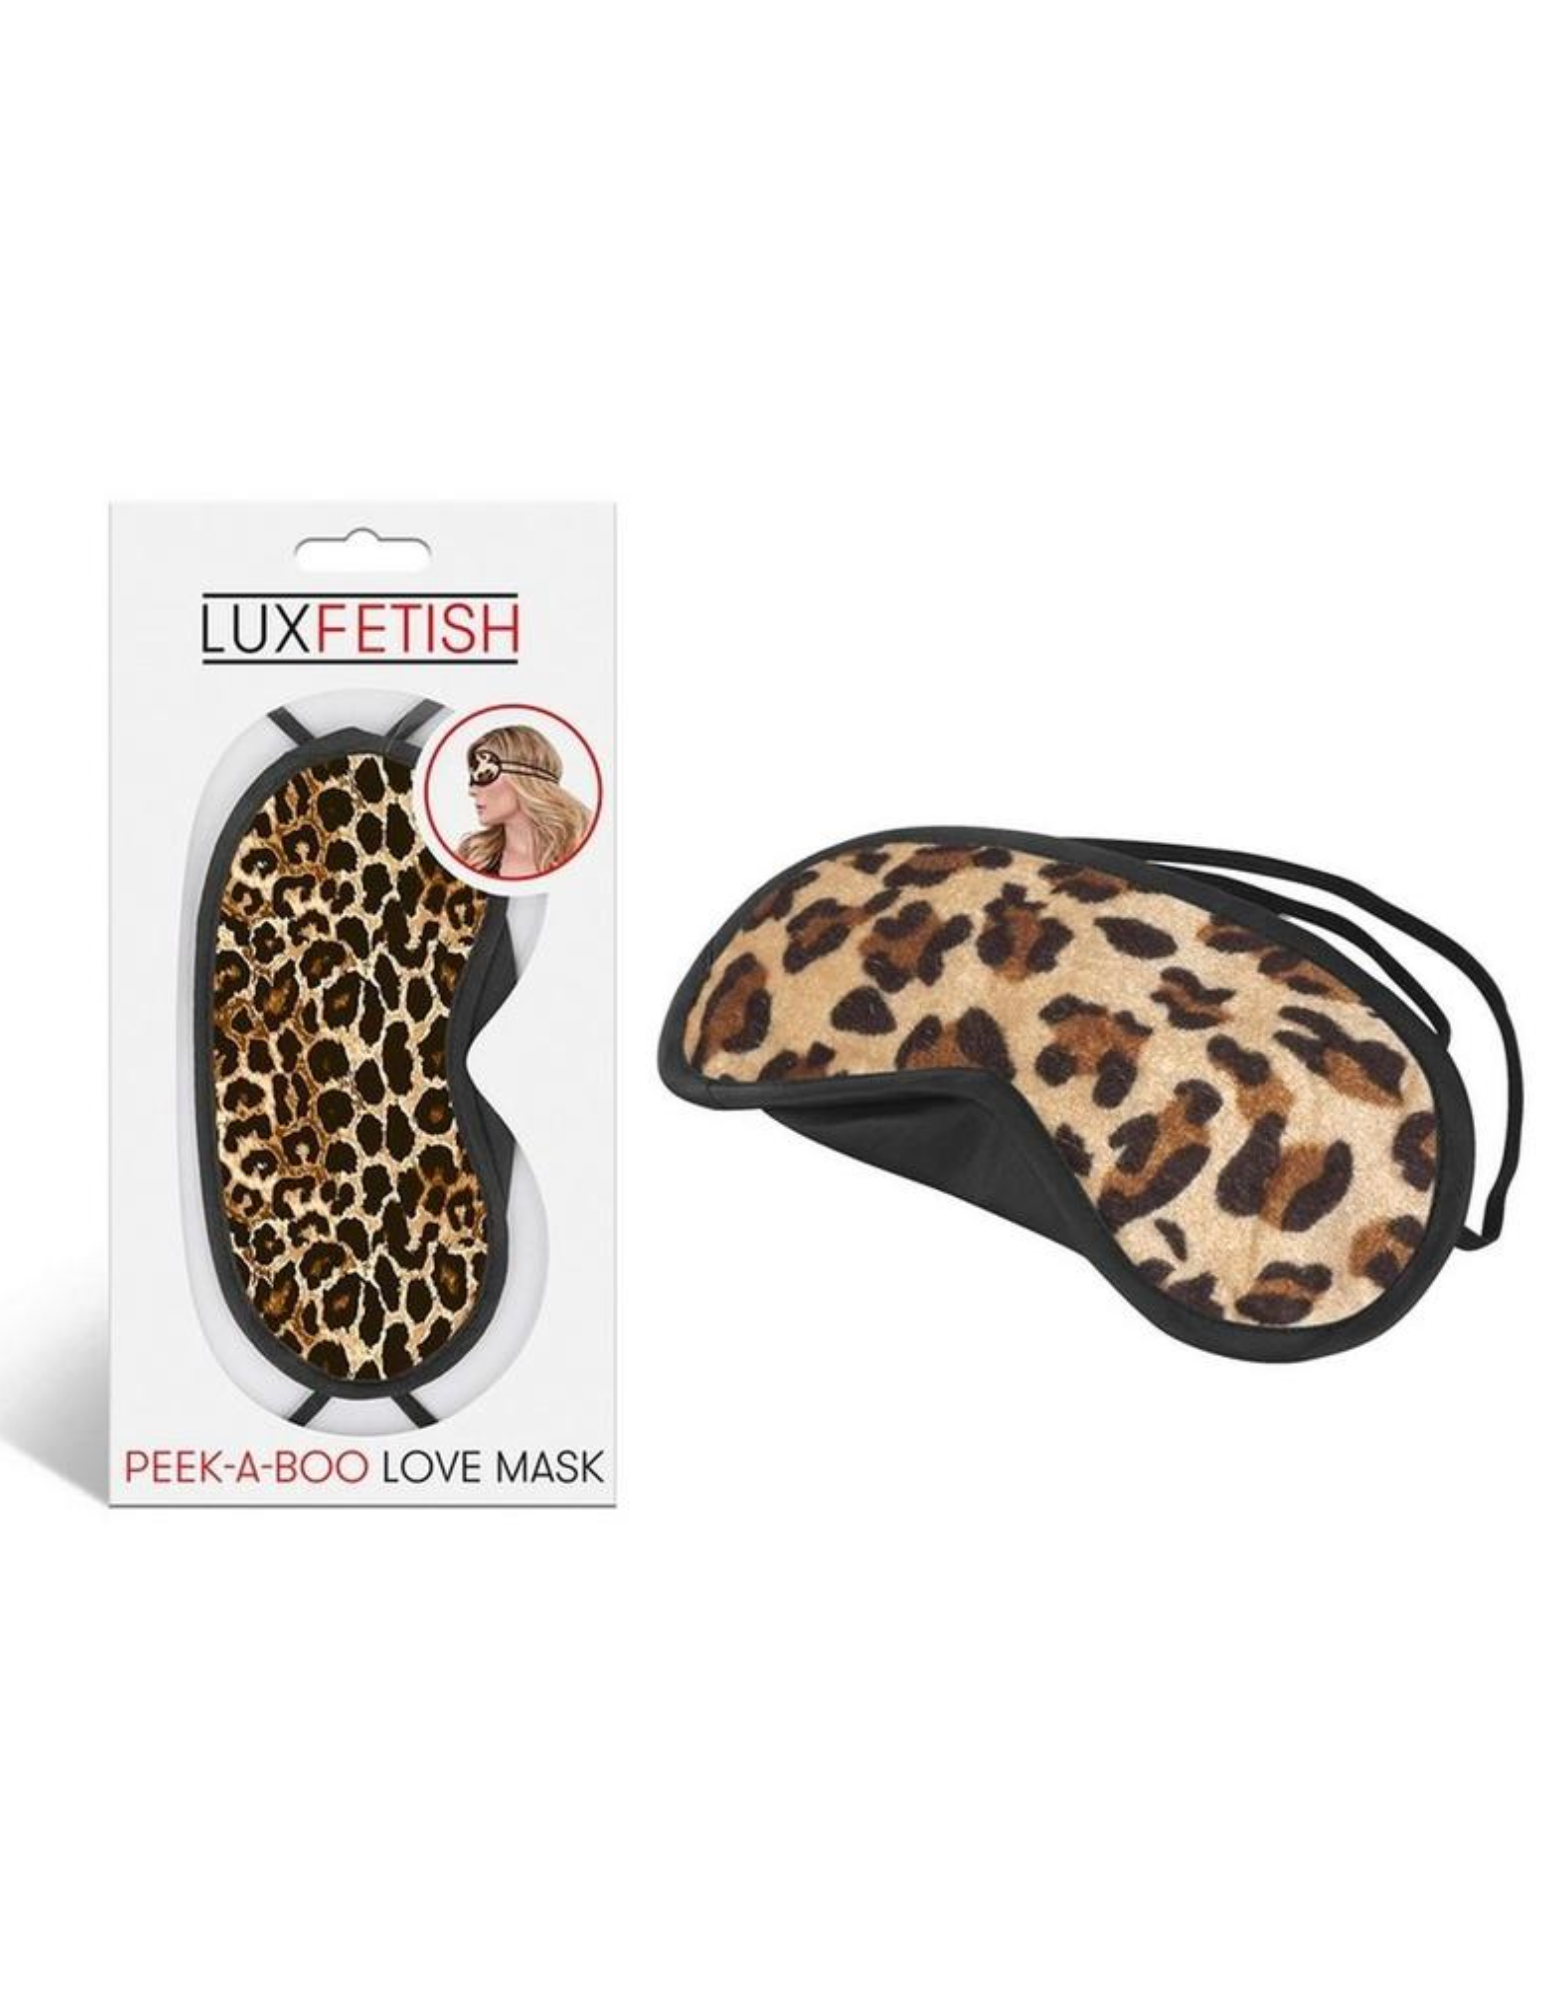 Photo shows the love mask in the package as well as next to it (leopard).